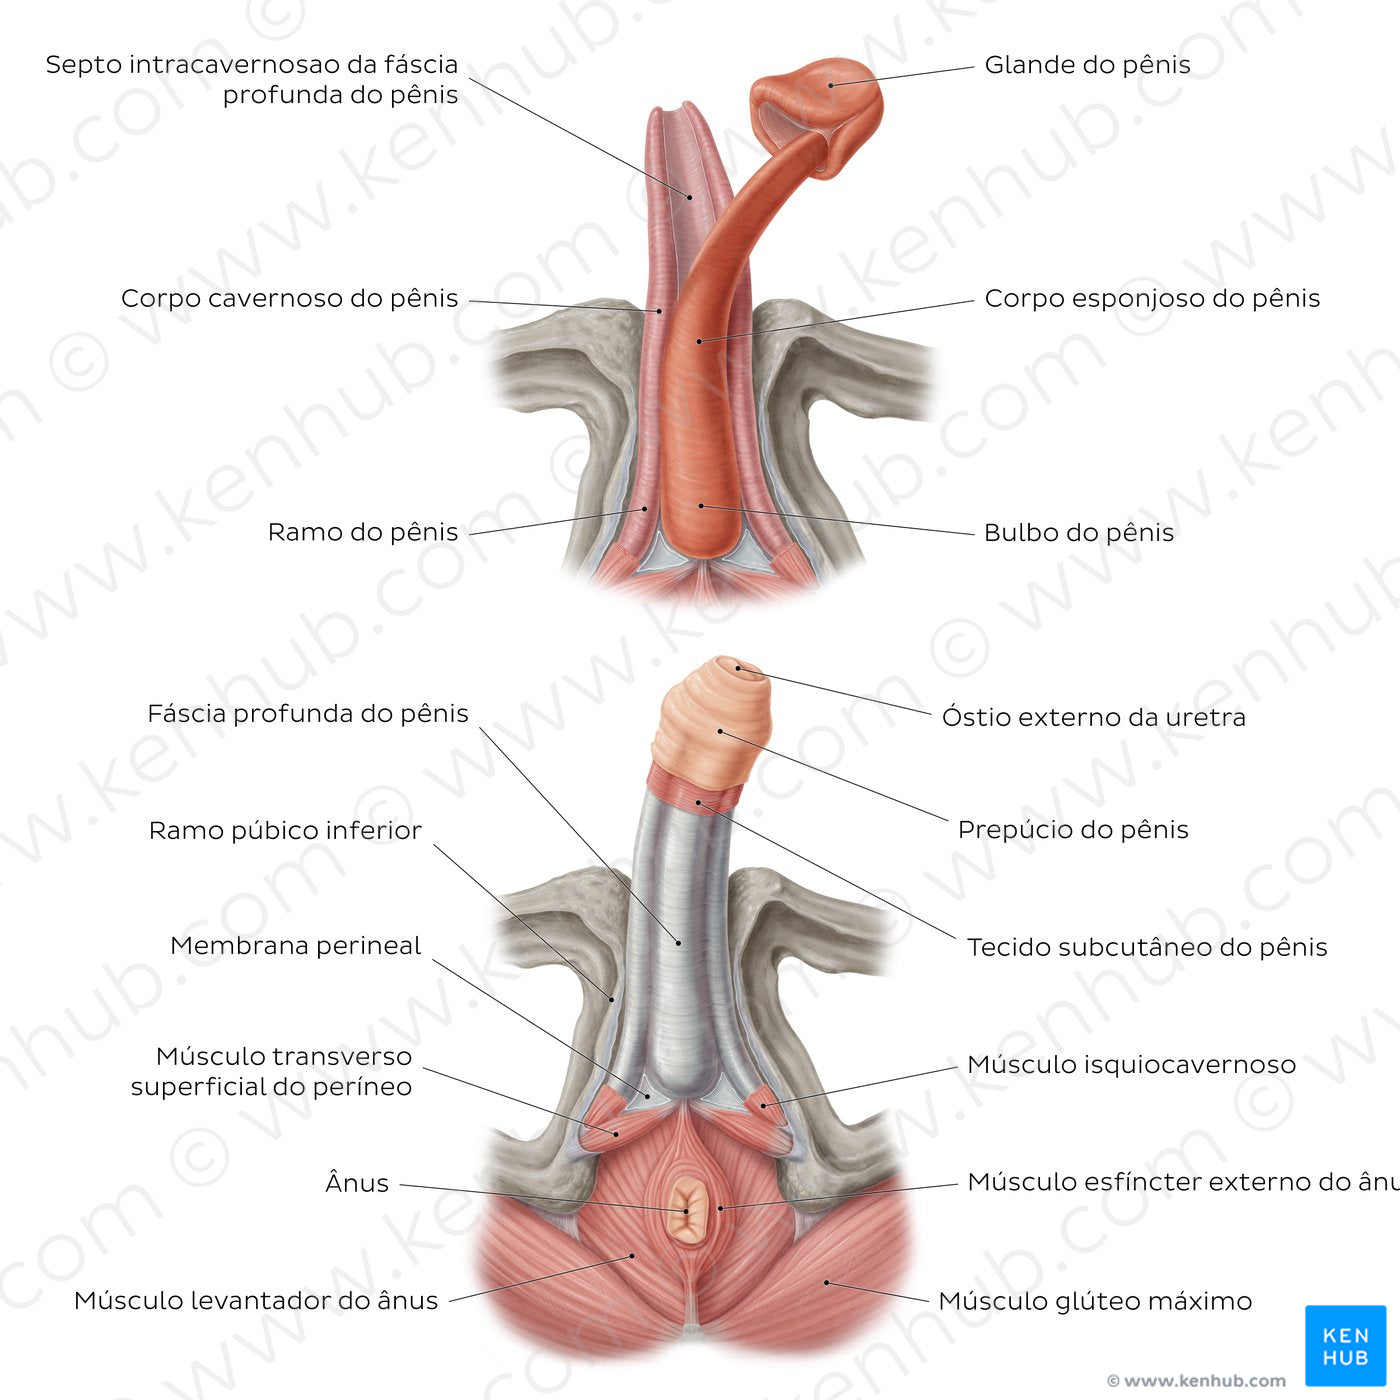 Structure of the penis (Portuguese)